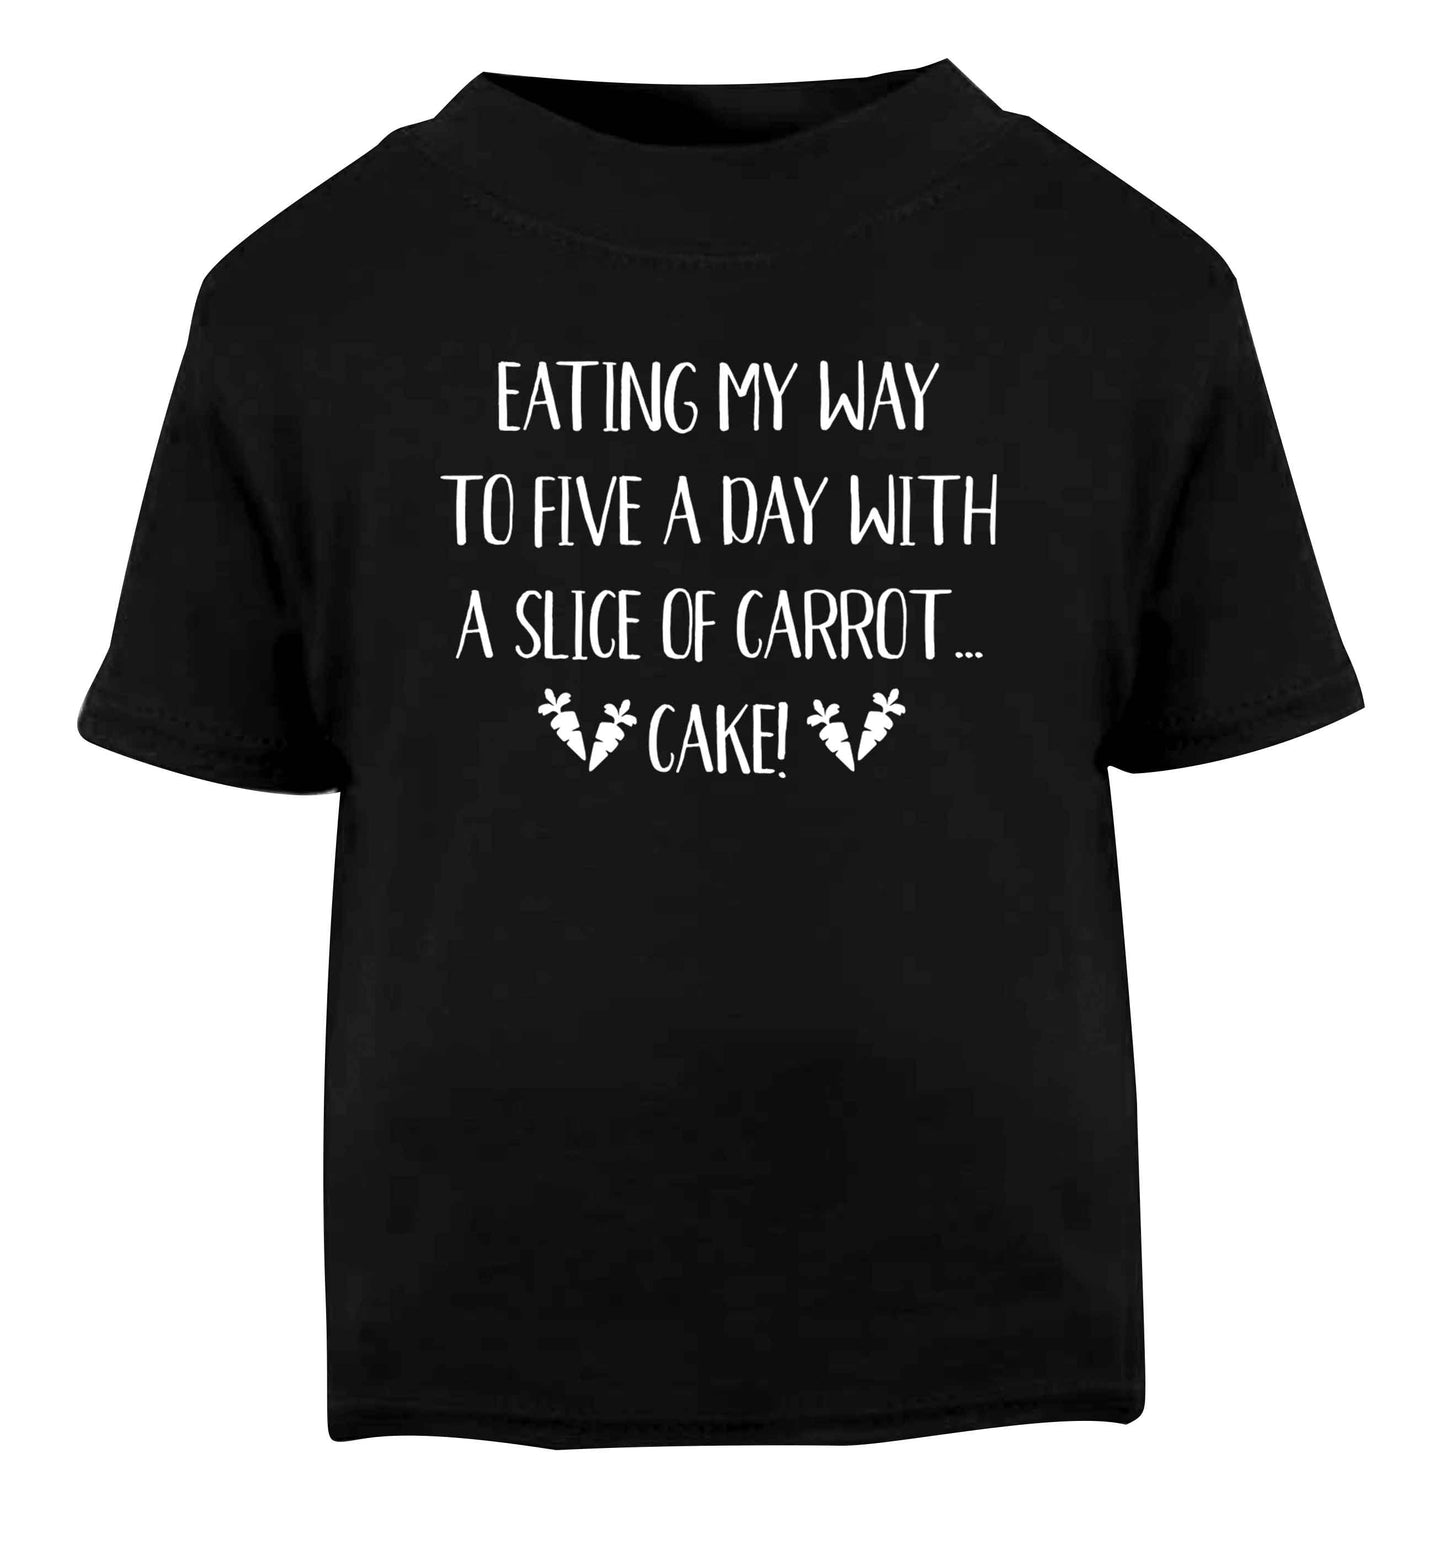 Eating my way to five a day with a slice of carrot cake day Black Baby Toddler Tshirt 2 years